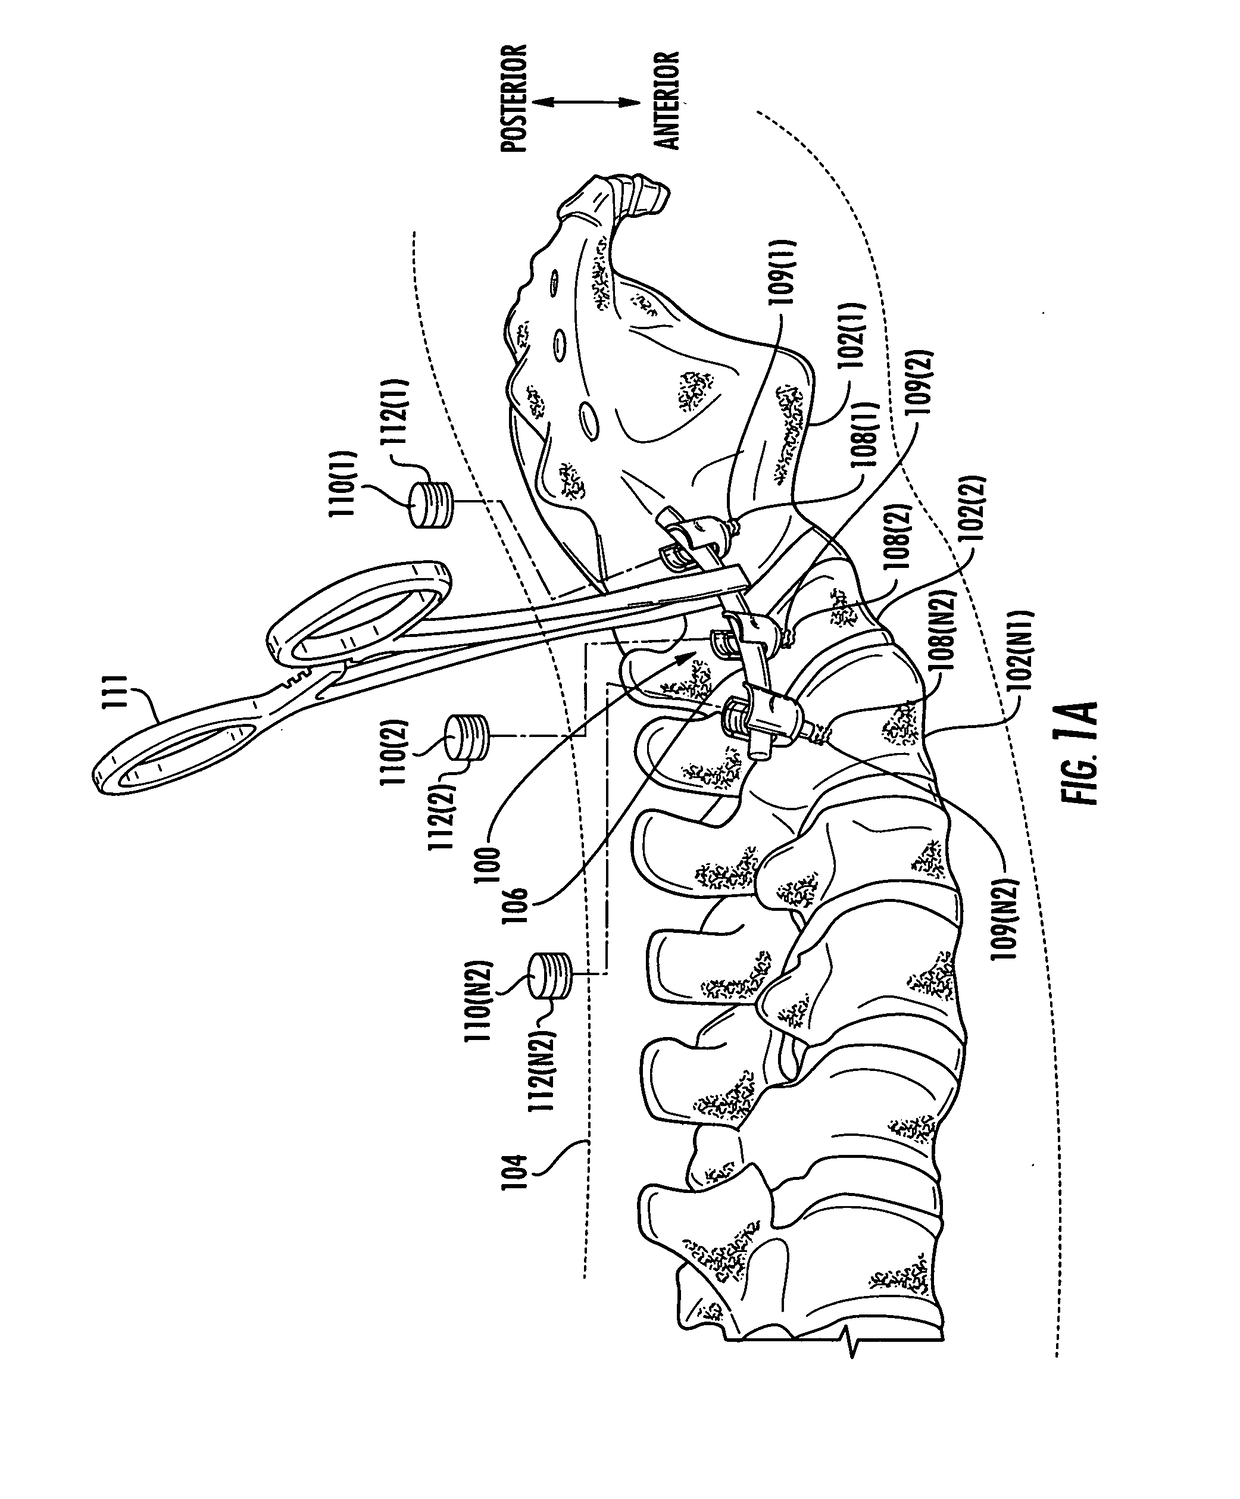 Multi-mode torque drivers employing anti-backdrive units for managing pedicle screw attachments with vertebrae, and related systems and methods